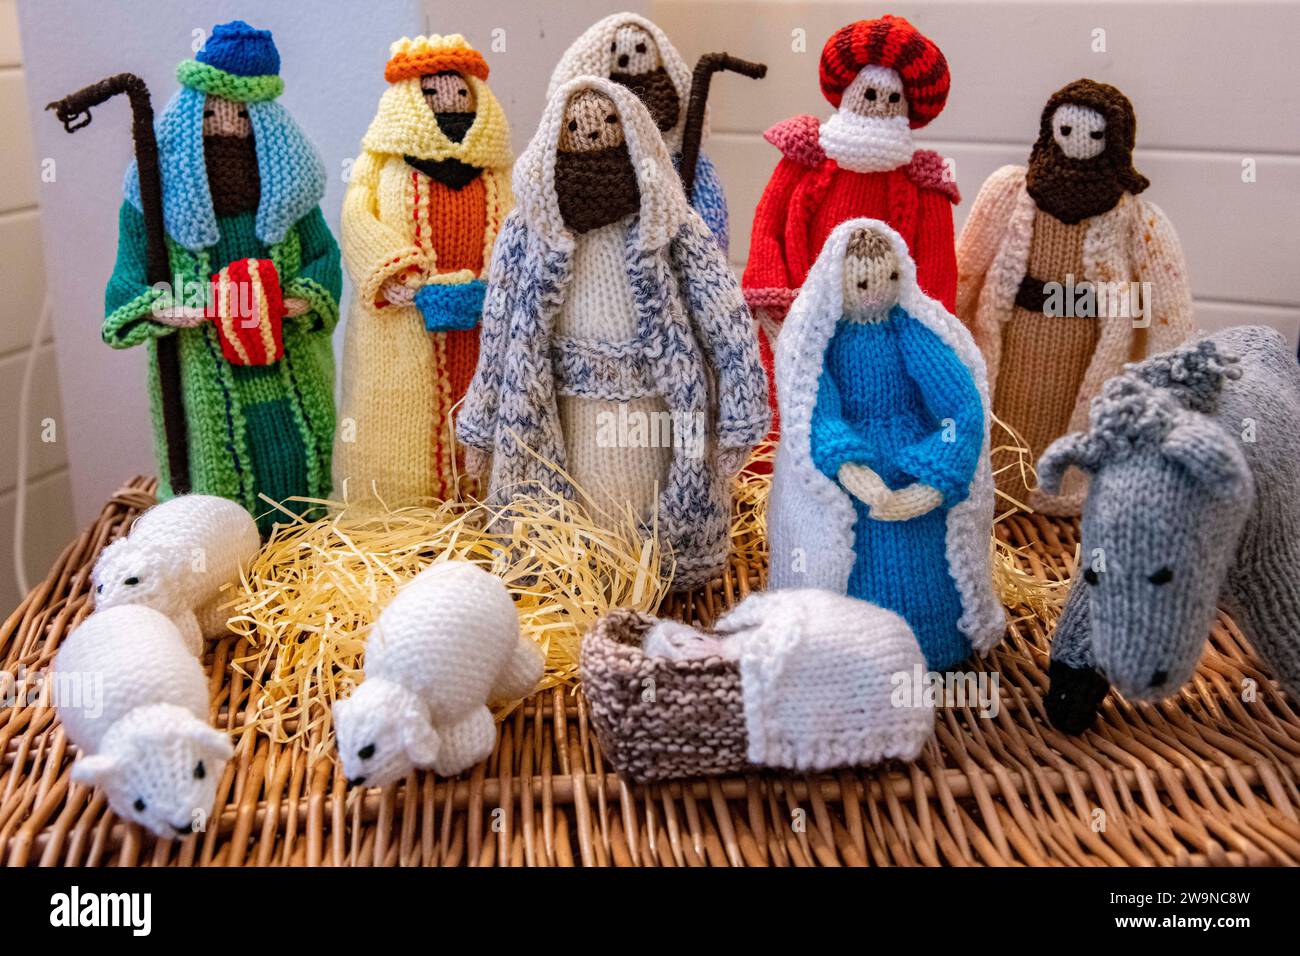 A knitted nativity scene at Christmas time Stock Photo